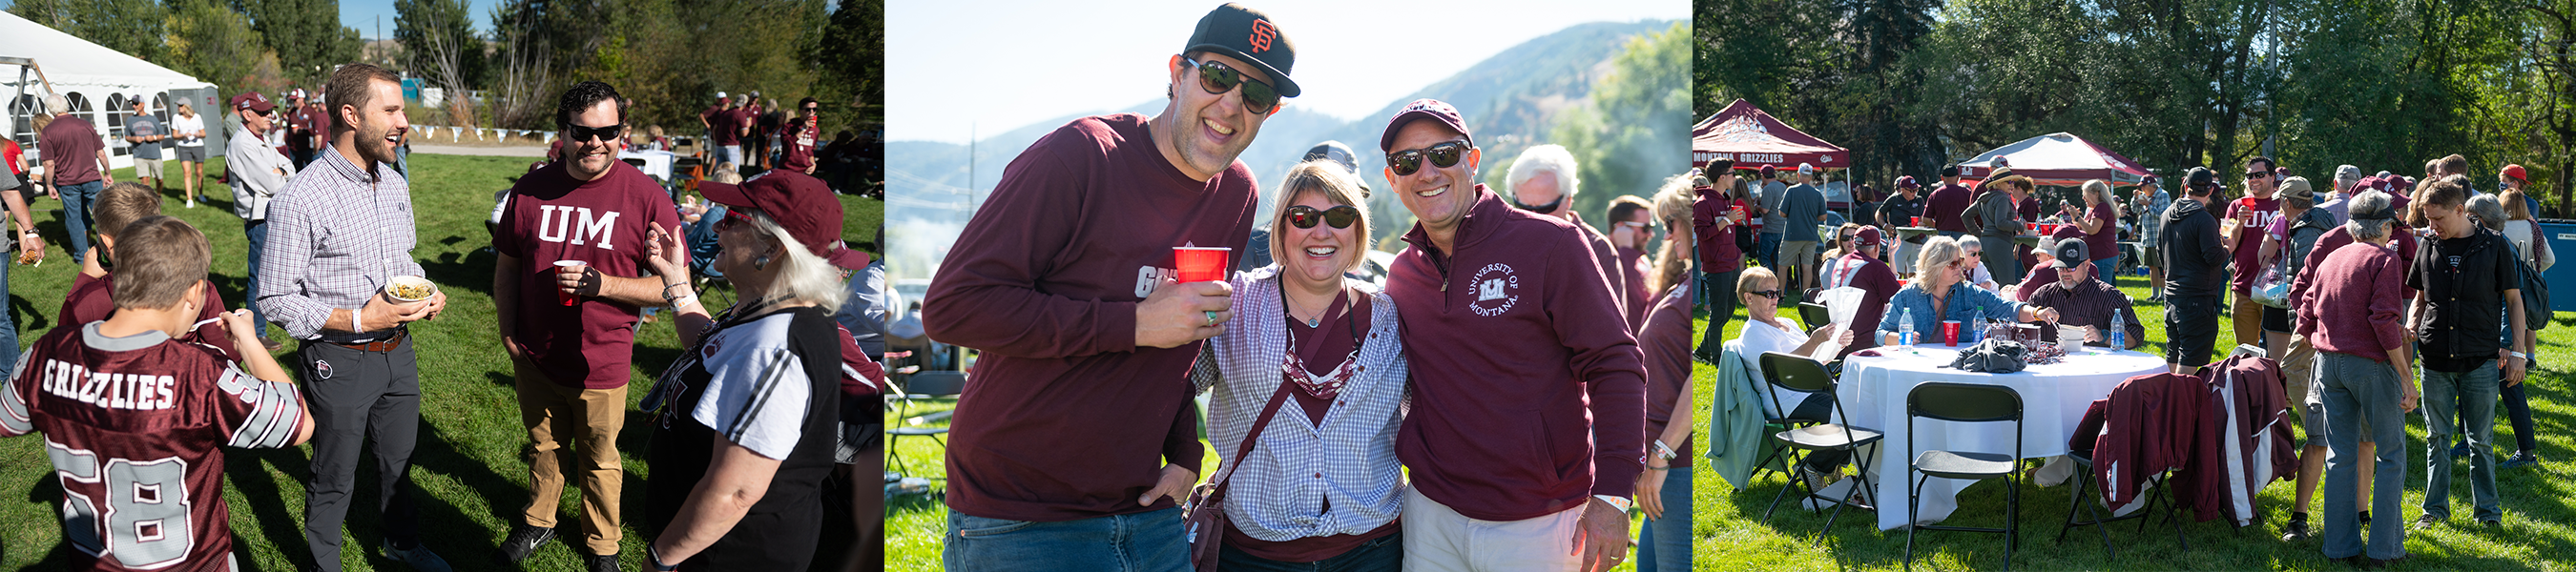 Images from the Alumni Homecoming tailgate